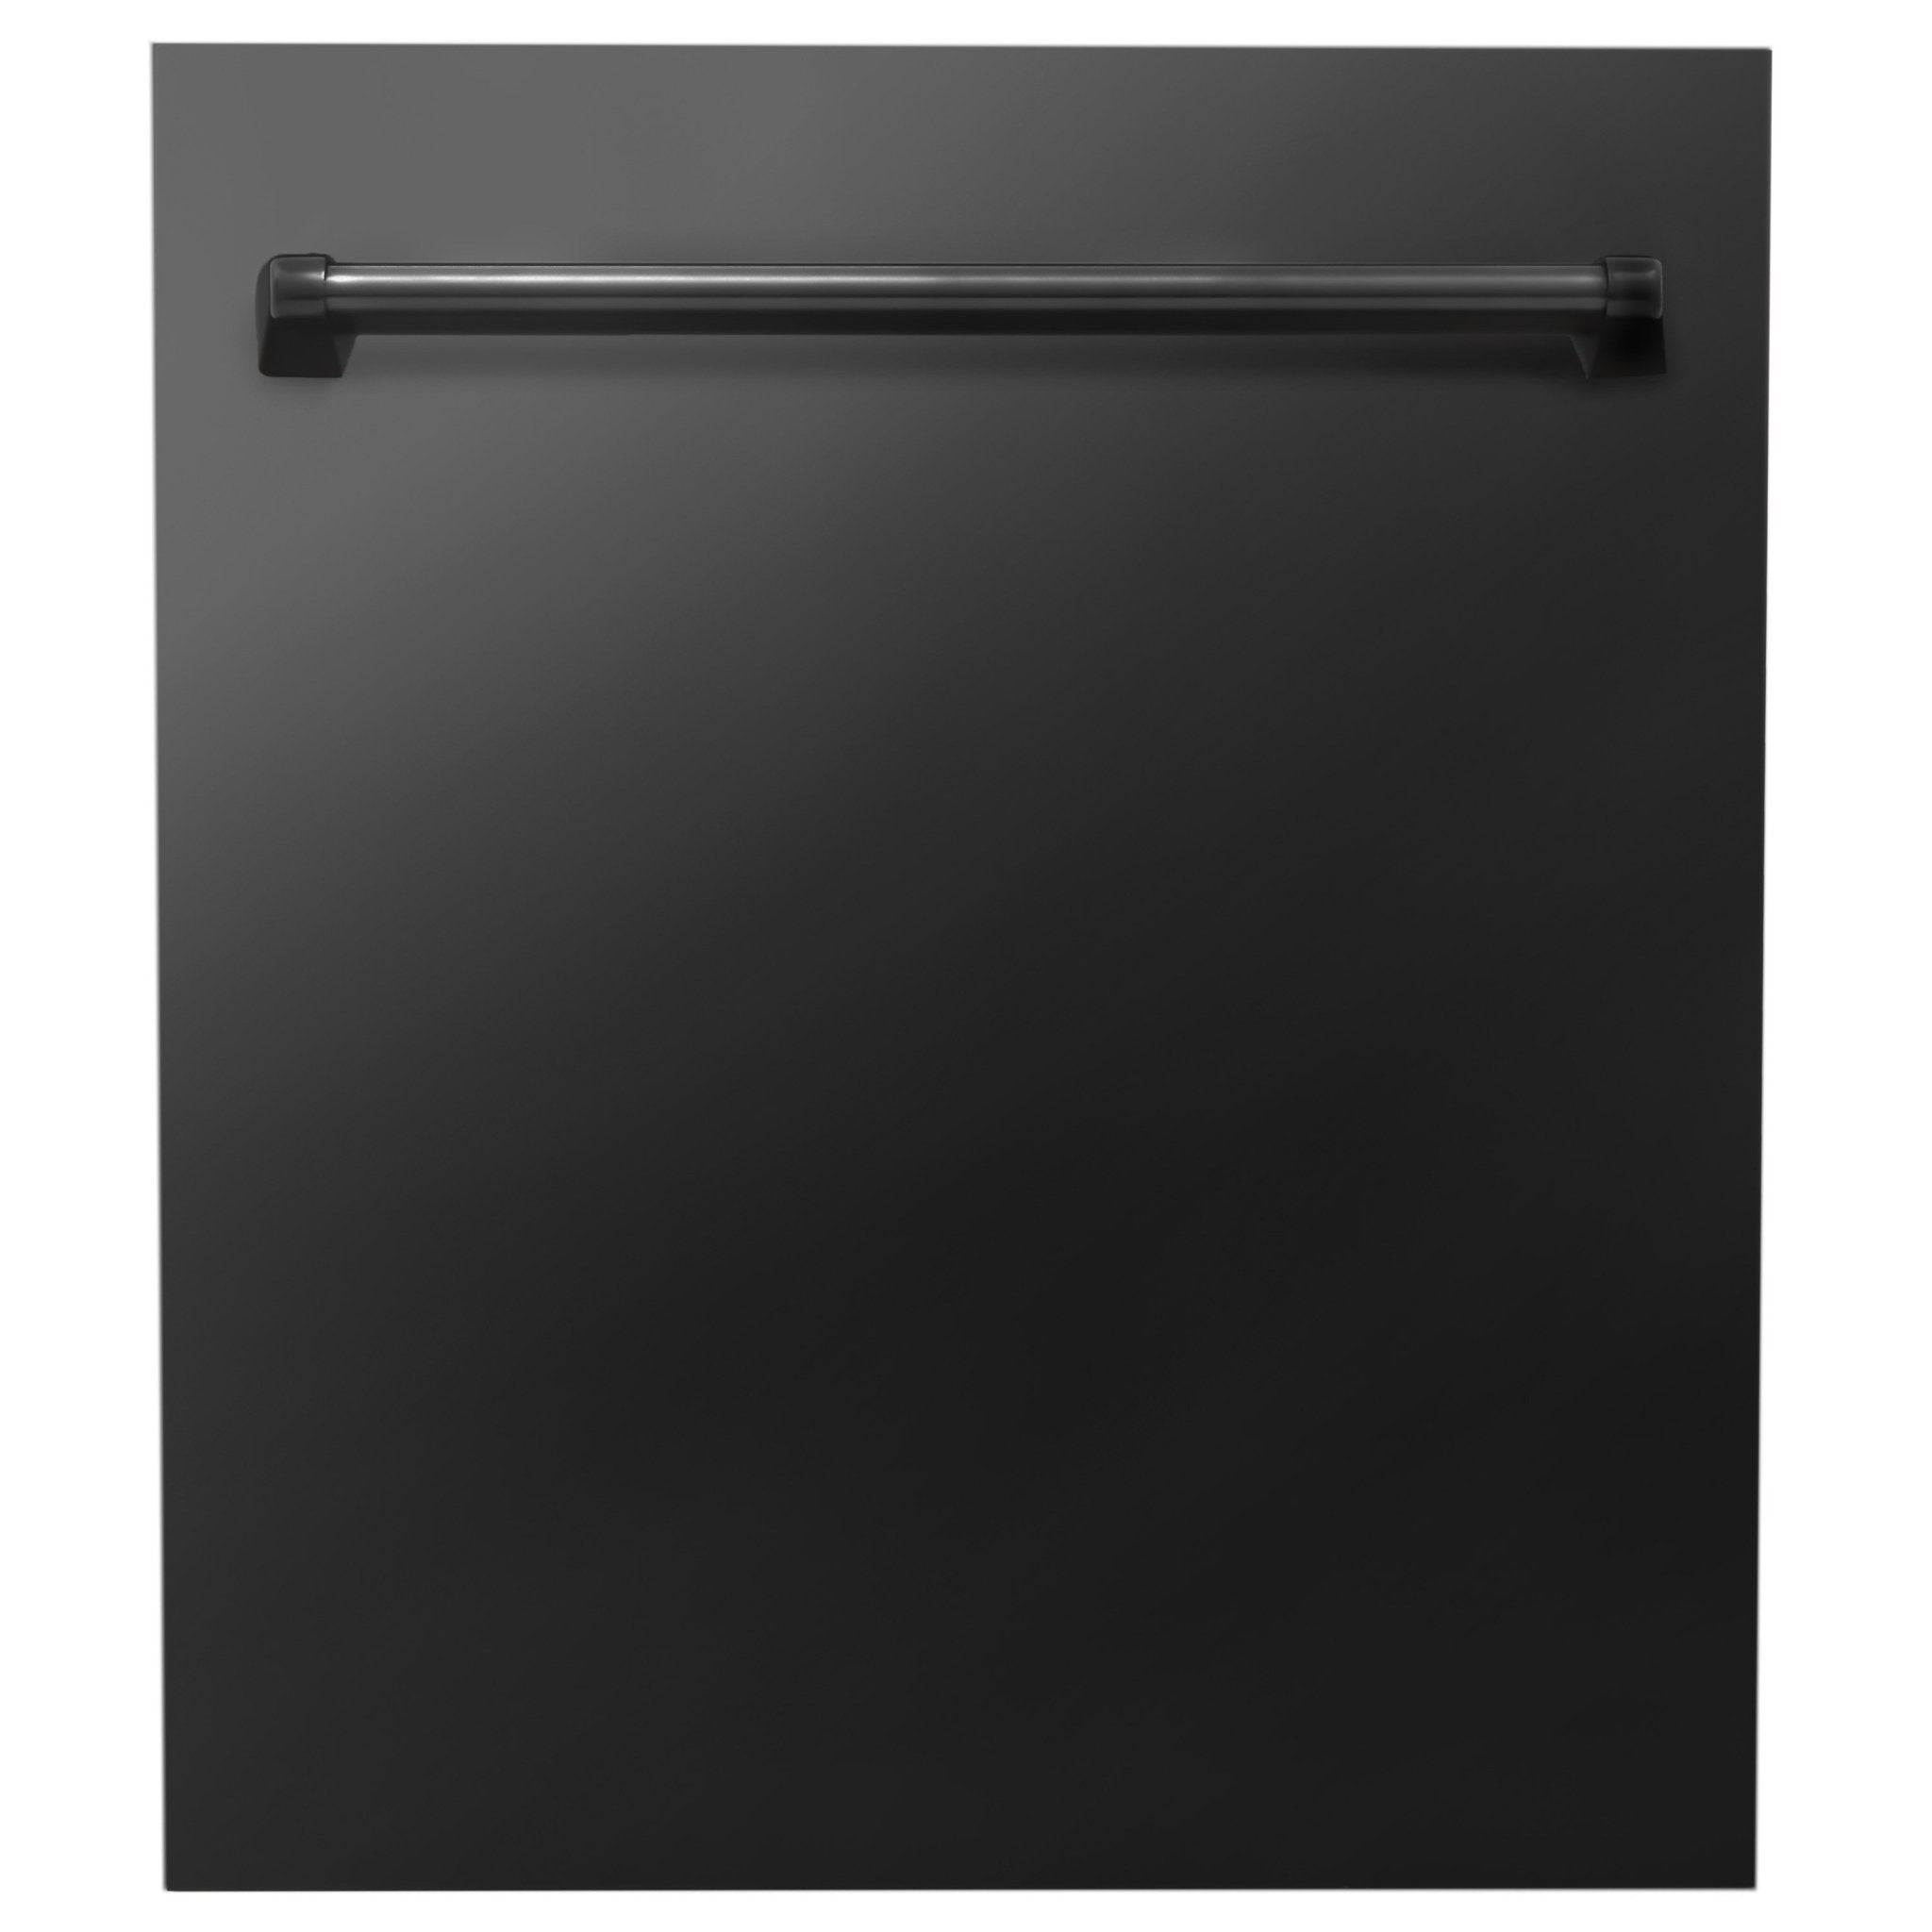 ZLINE 24 in. Top Control Dishwasher with Stainless Steel Tub and Traditional Style Handle, 40dBa